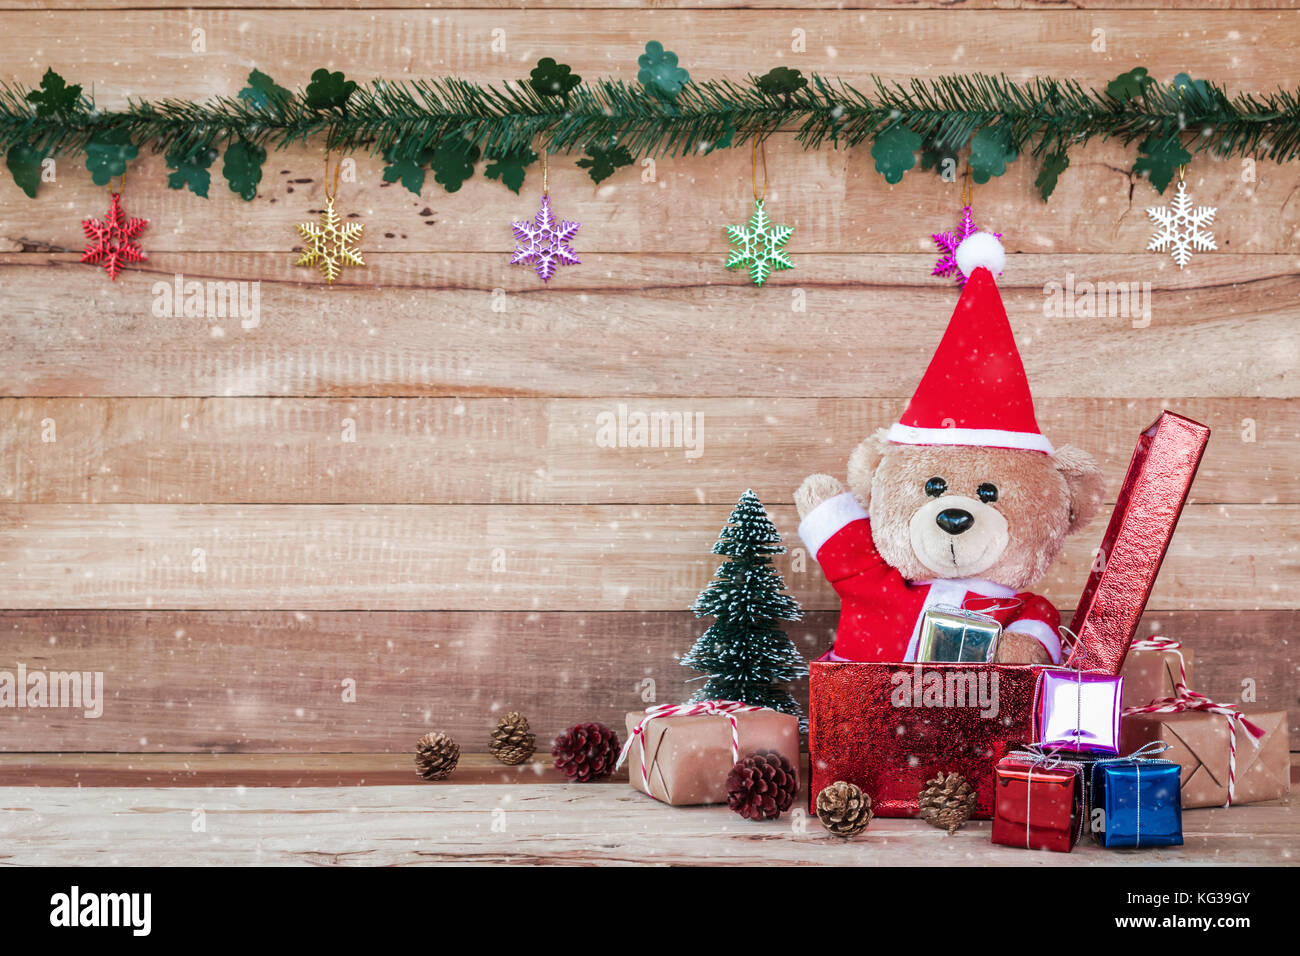 A photo of Teddy Bear in Santa Cross Dress Sitting in the middle of the enclave of Christmas decoration with woodboard background Stock Photo